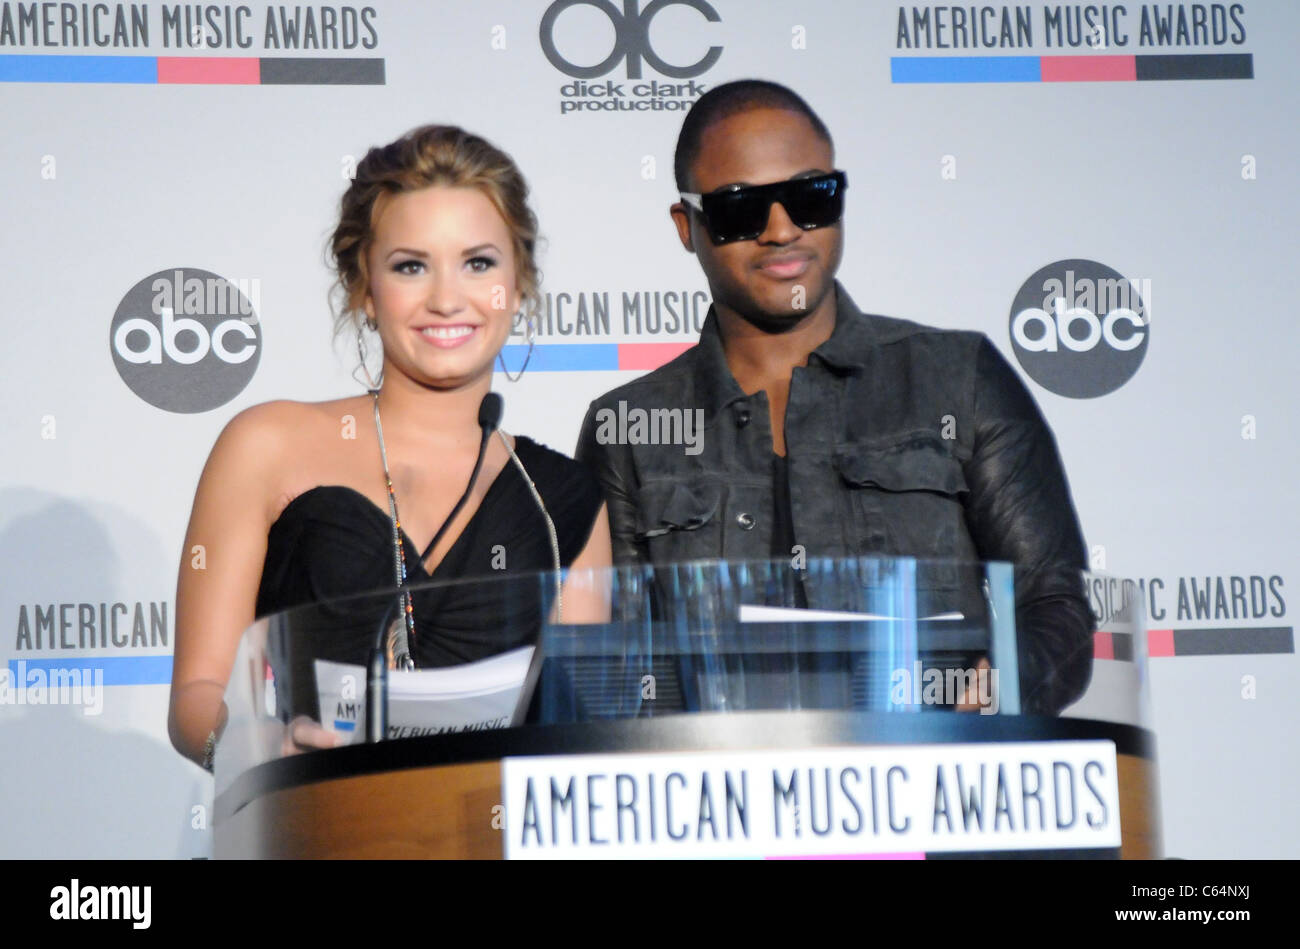 Demi Lovato, Taio Cruz at the press conference for 2010 AMERICAN MUSIC AWARDS (AMA) Nominations Announcement, JW Marriott Los Angeles at L.A. LIVE, Los Angeles, CA October 12, 2010. Photo By: Dee Cercone/Everett Collection Stock Photo